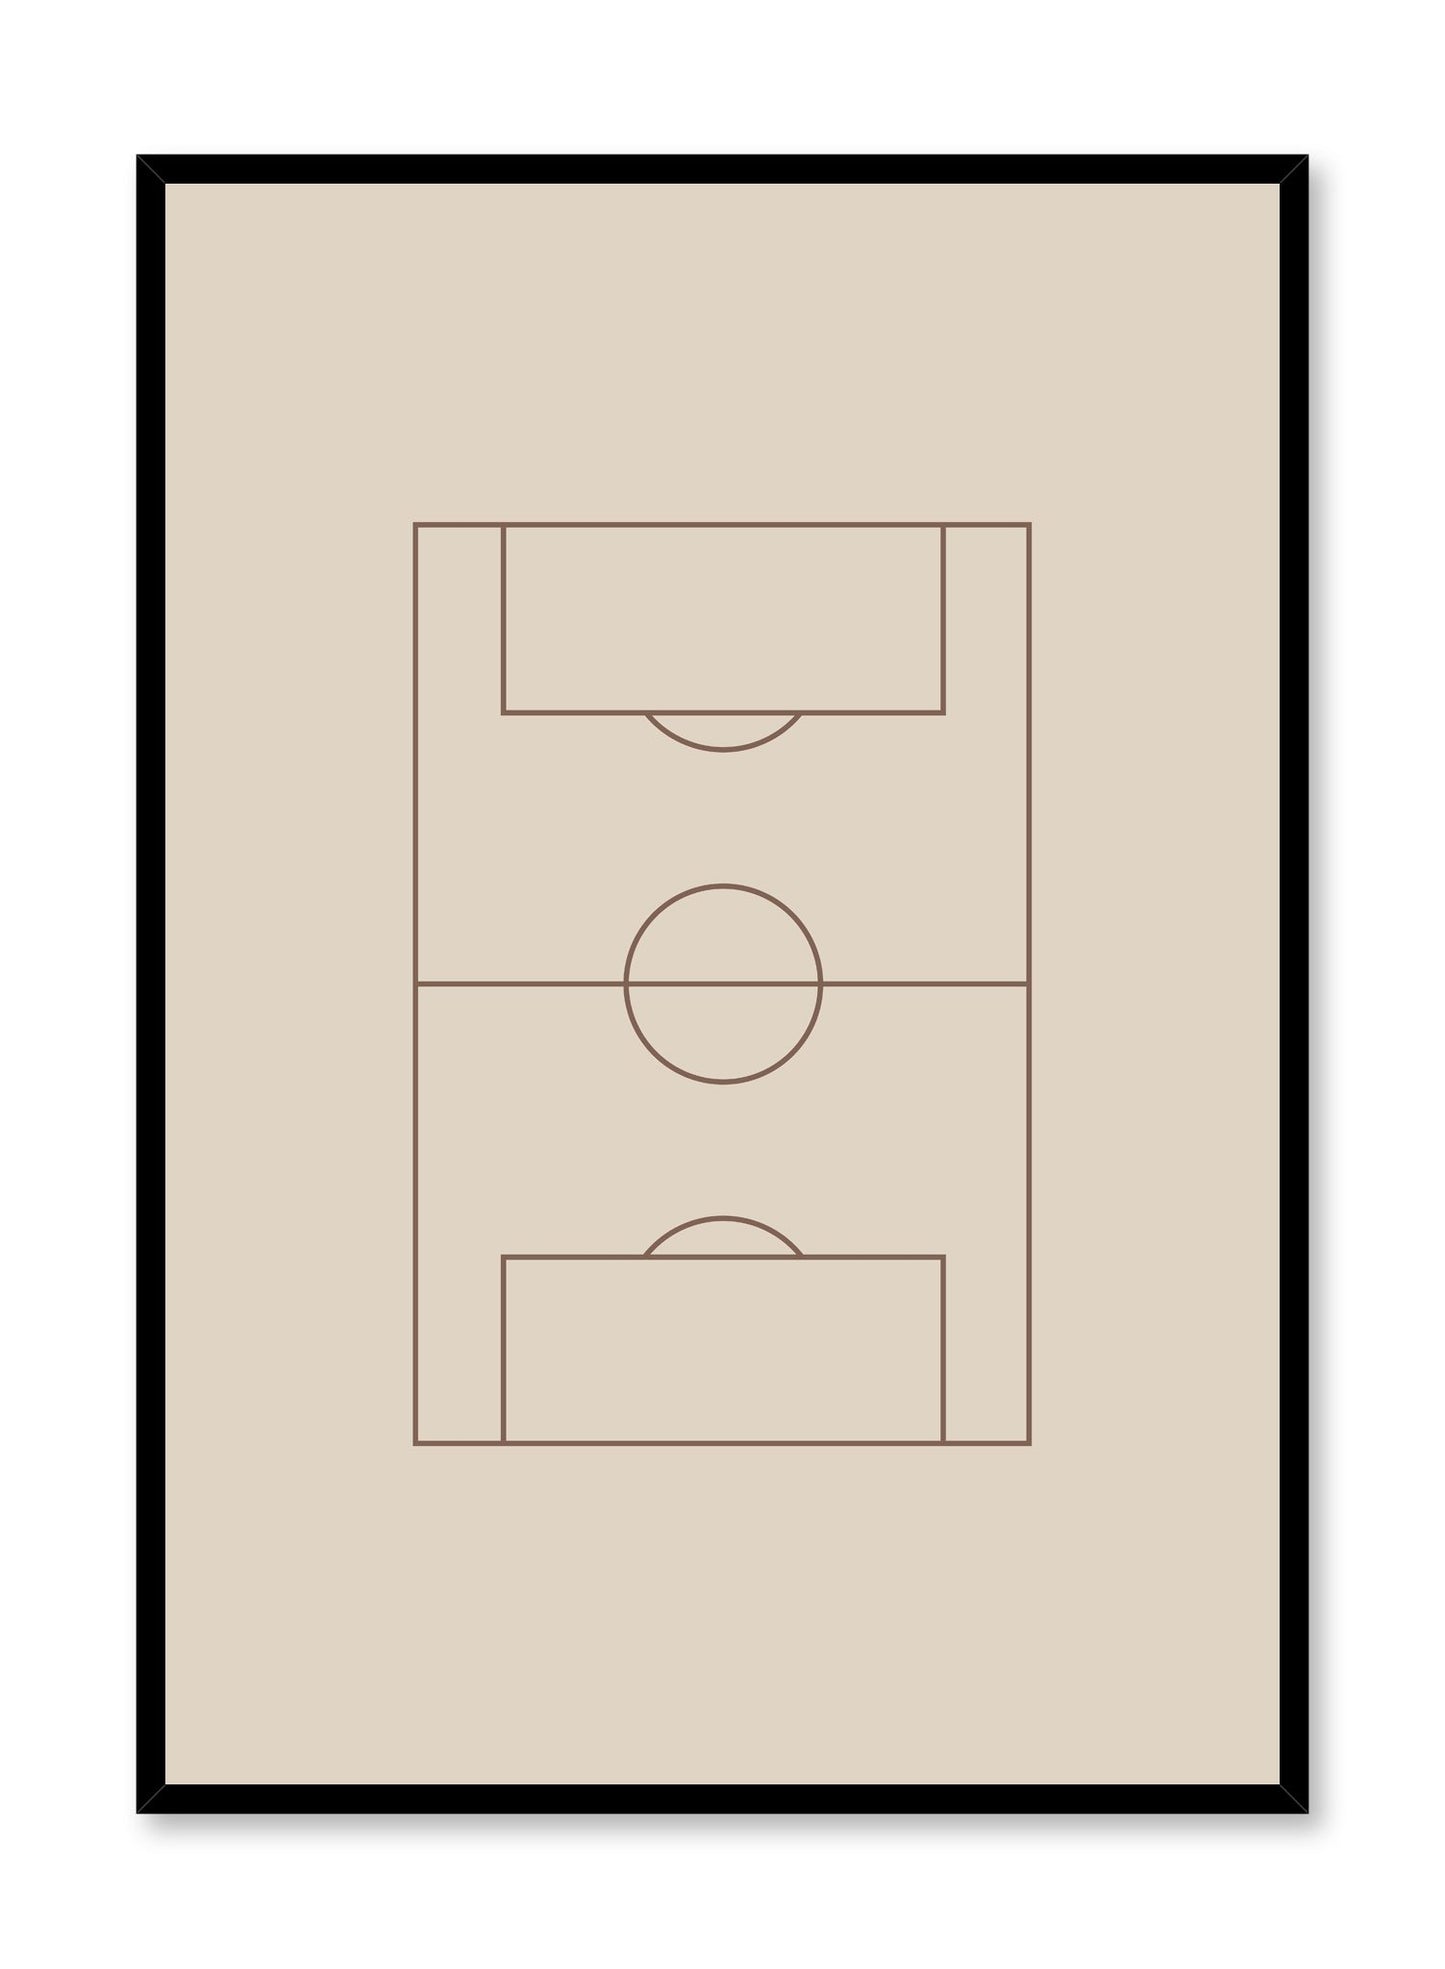 Minimalist design poster by Opposite Wall with Goal abstract graphic design soccer field